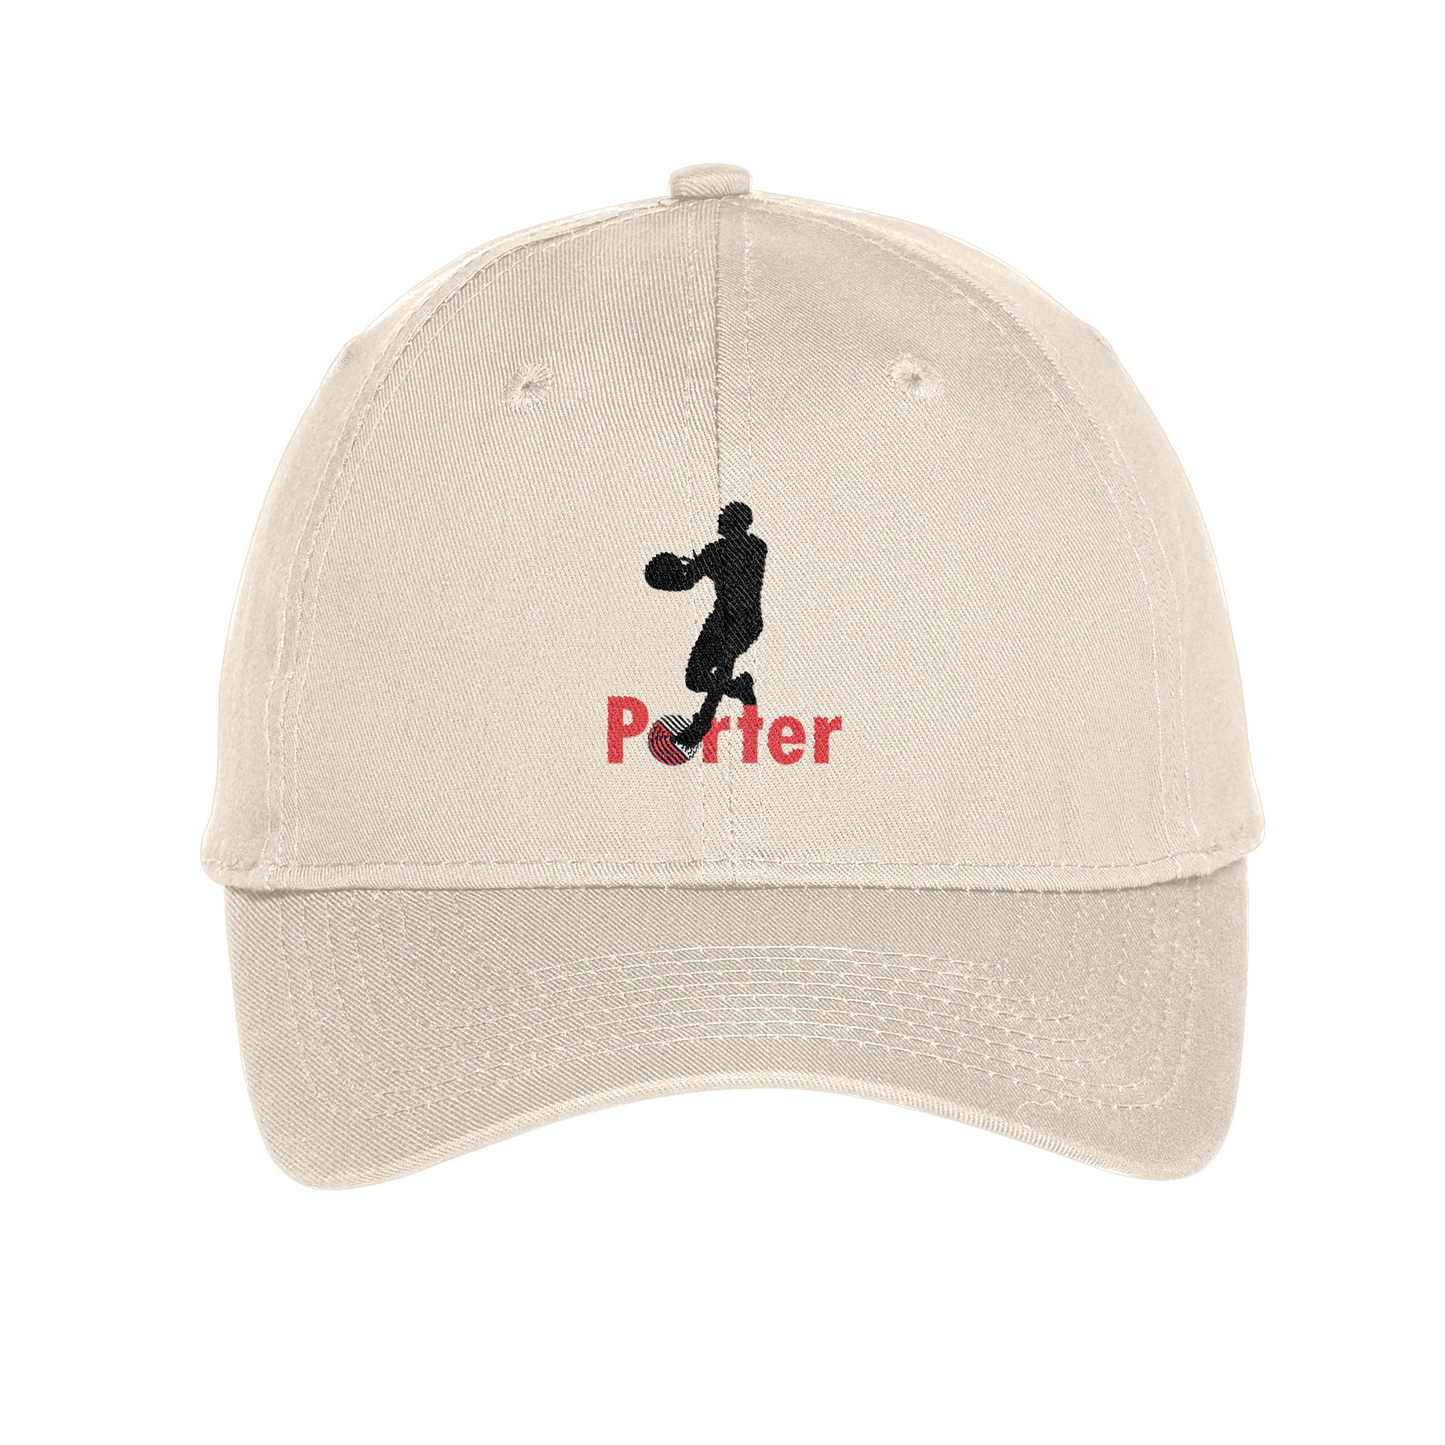 GT Porter Embroidered Twill Cap